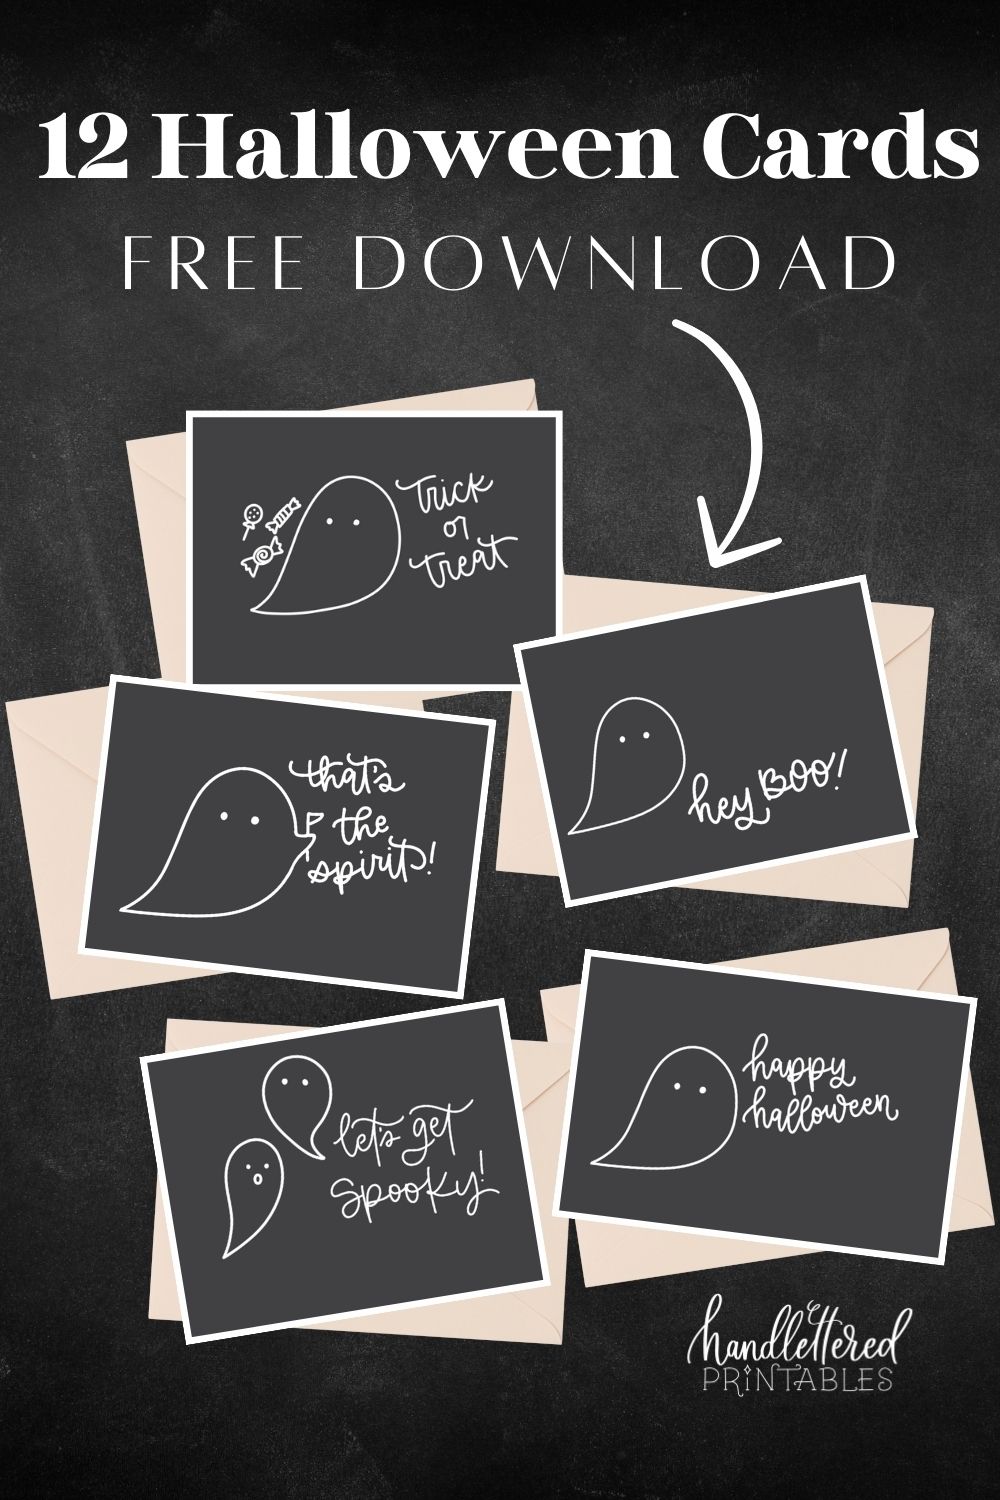 Free printable cards for halloween- pin shows 5 of the designs (from the set of 12). cards have a charcoal background and white line art ghosts with hand lettered greetings.